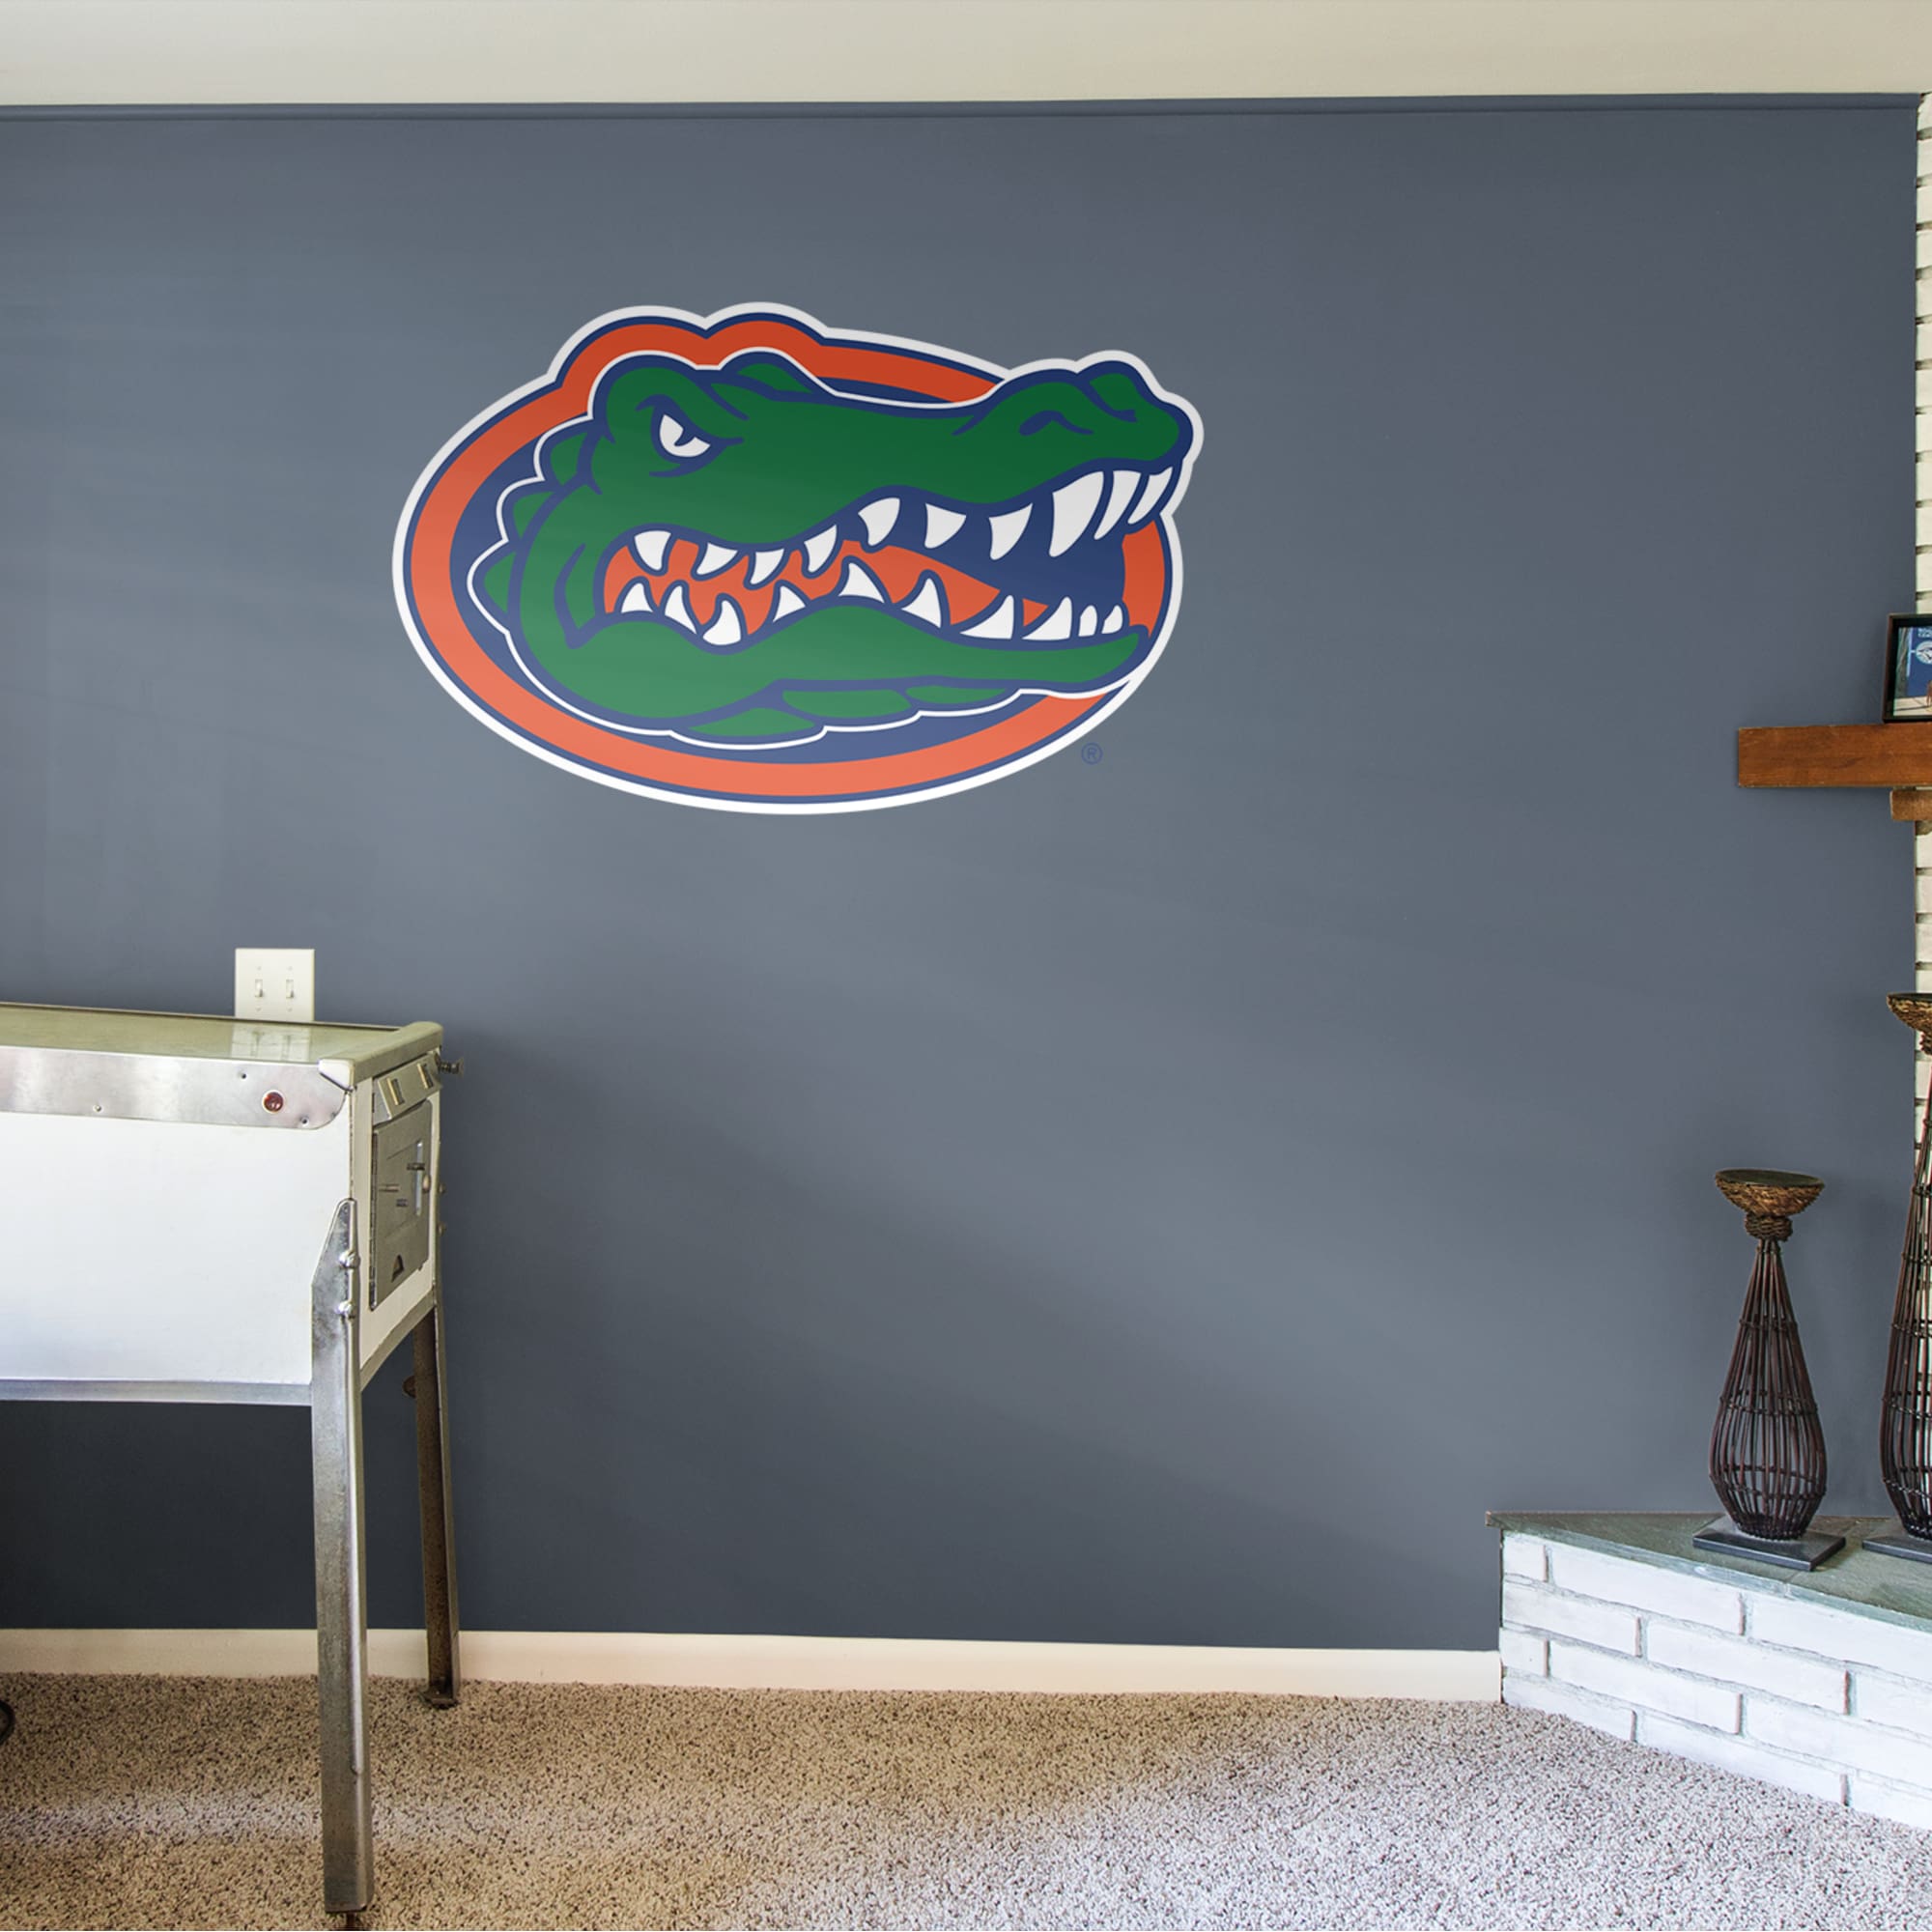 Florida Gators: Logo - Officially Licensed Removable Wall Decal 52.0"W x 33.0"H by Fathead | Vinyl